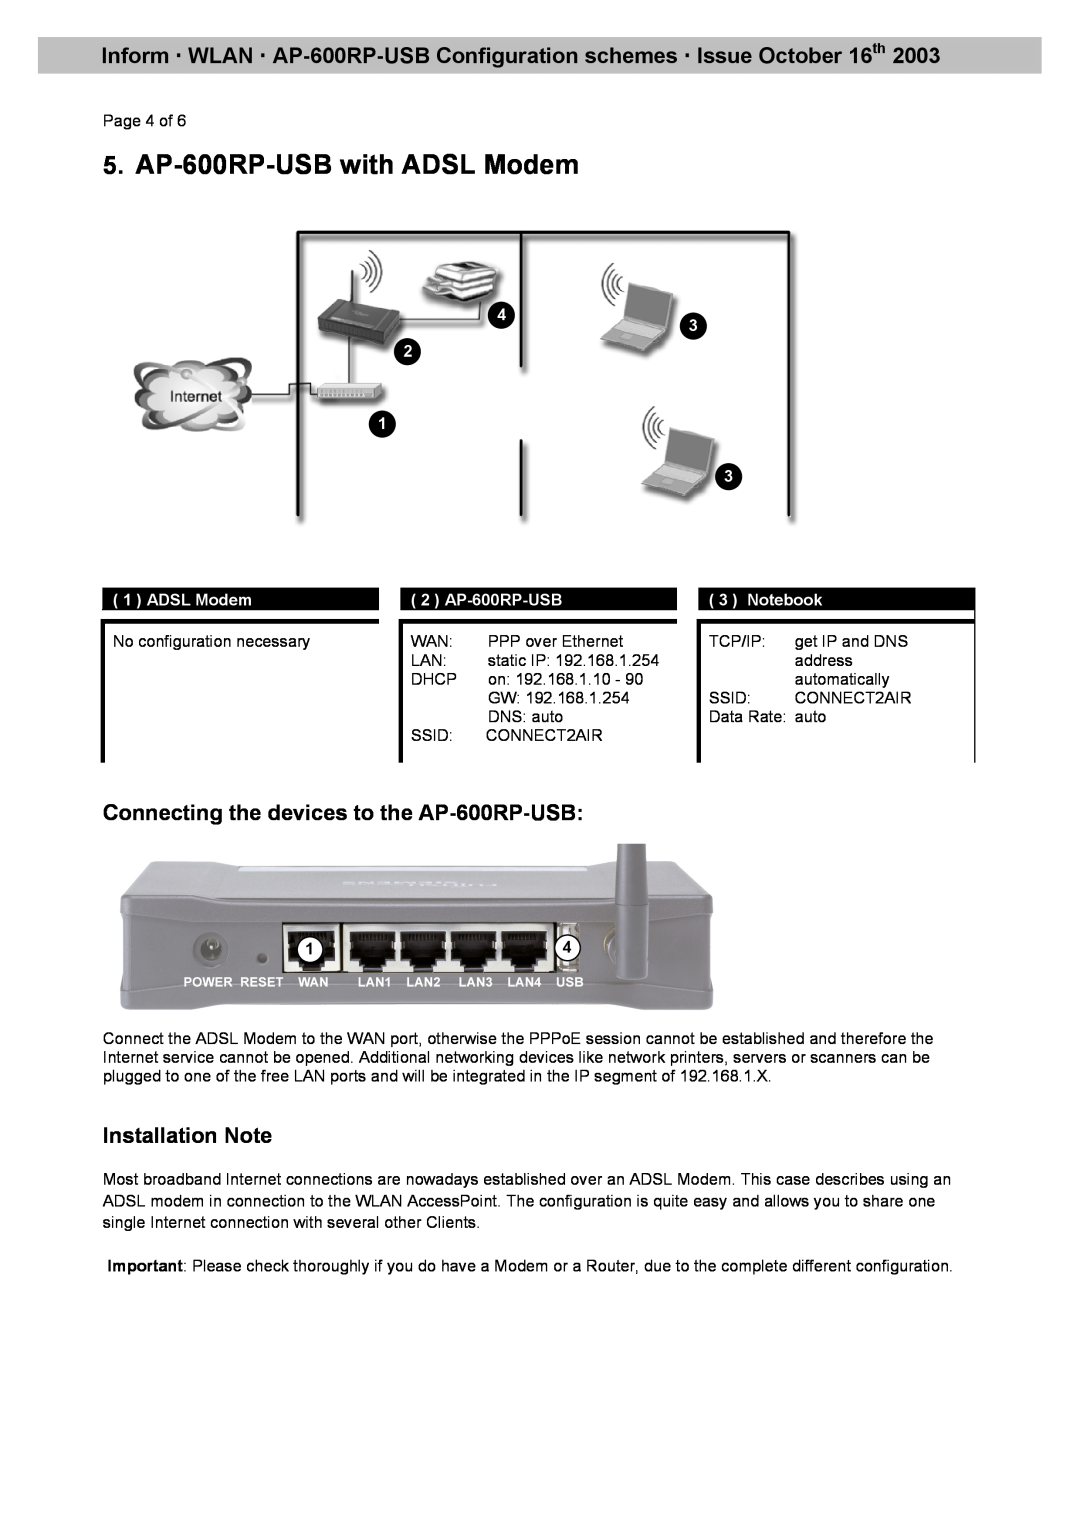 Fujitsu AP-600RP-USB with ADSL Modem, Connecting the devices to the AP-600RP-USB, Installation Note, 2 AP-600RP-USB 